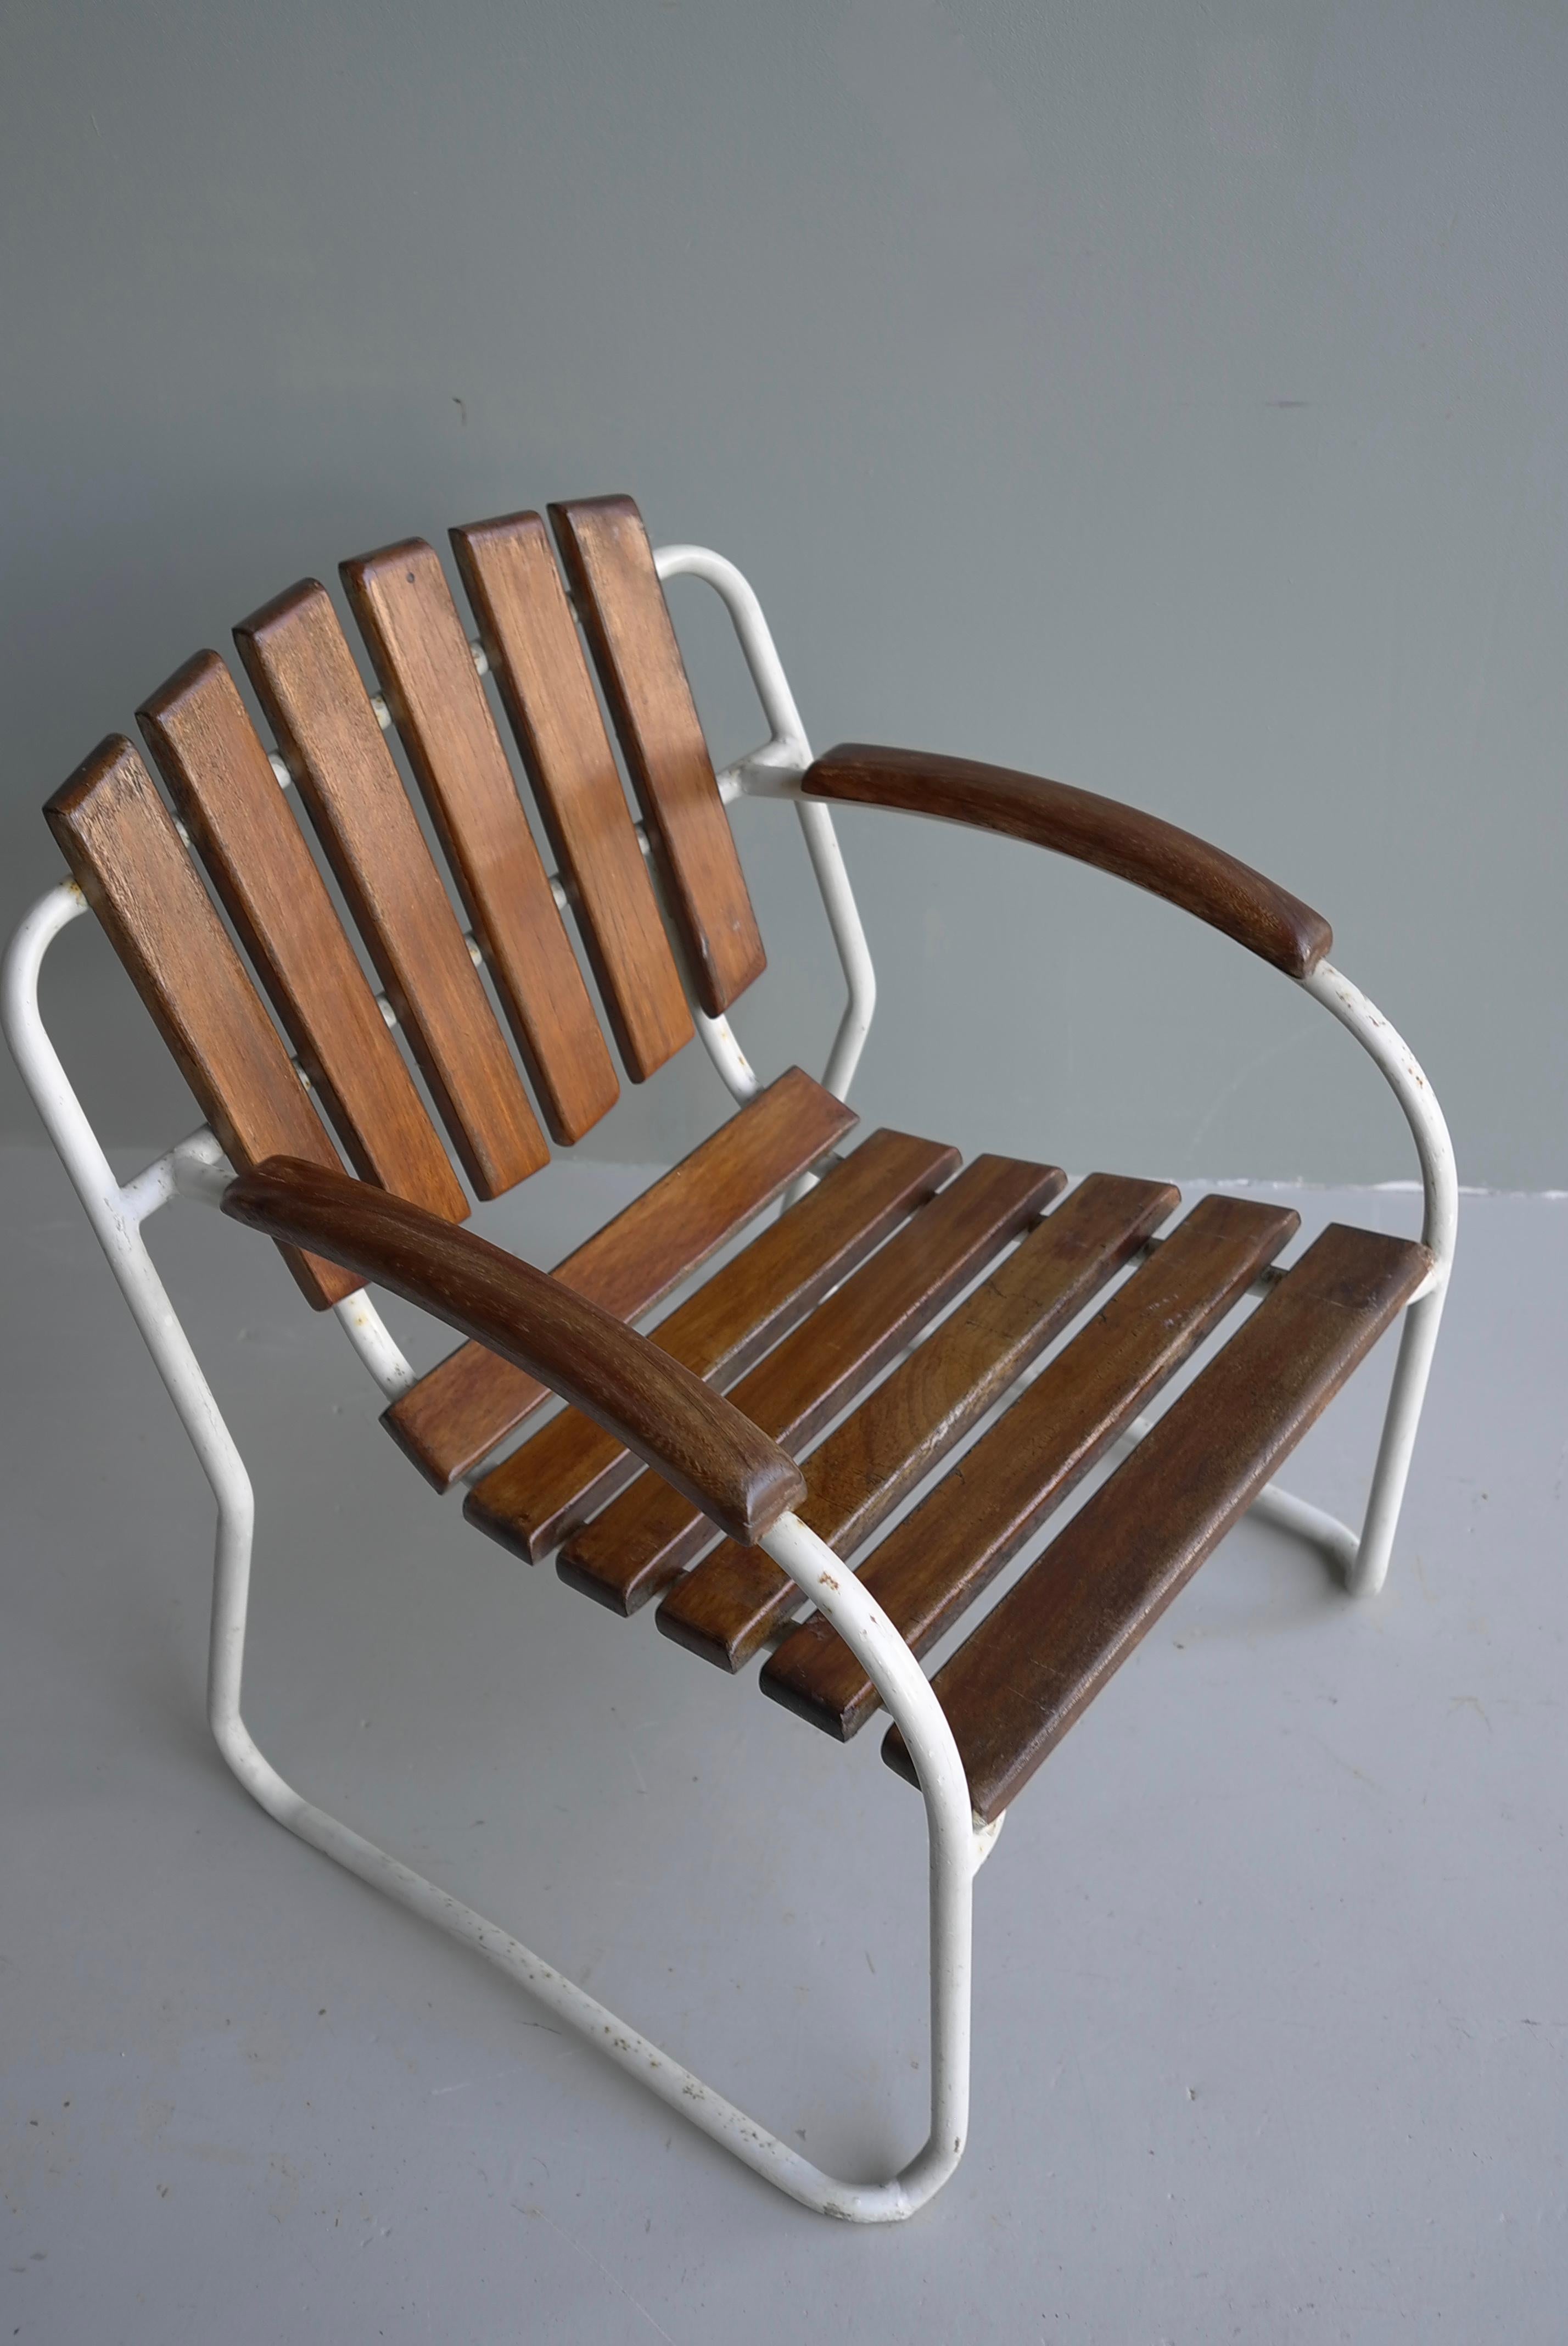 4x Tubular Frame and Slatwood Stackable Garden Chairs, 1930's For Sale 1